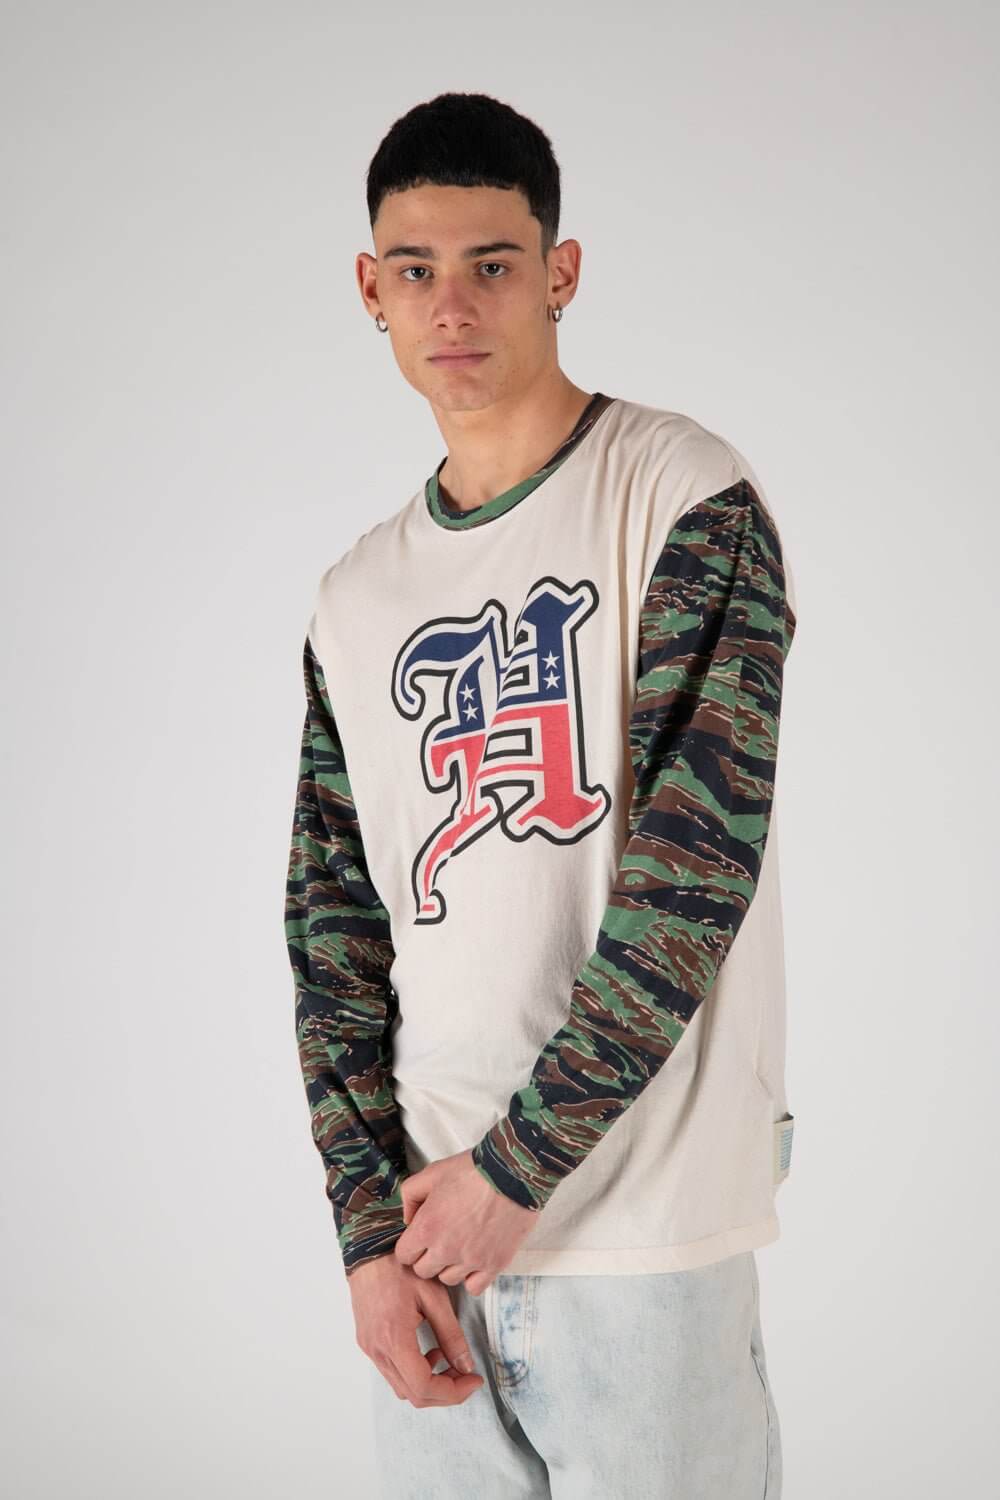 LUCKY KID - H Regular fit long sleeve t-shirt printed on the front. Composition: 100% Cotton HTC LOS ANGELES